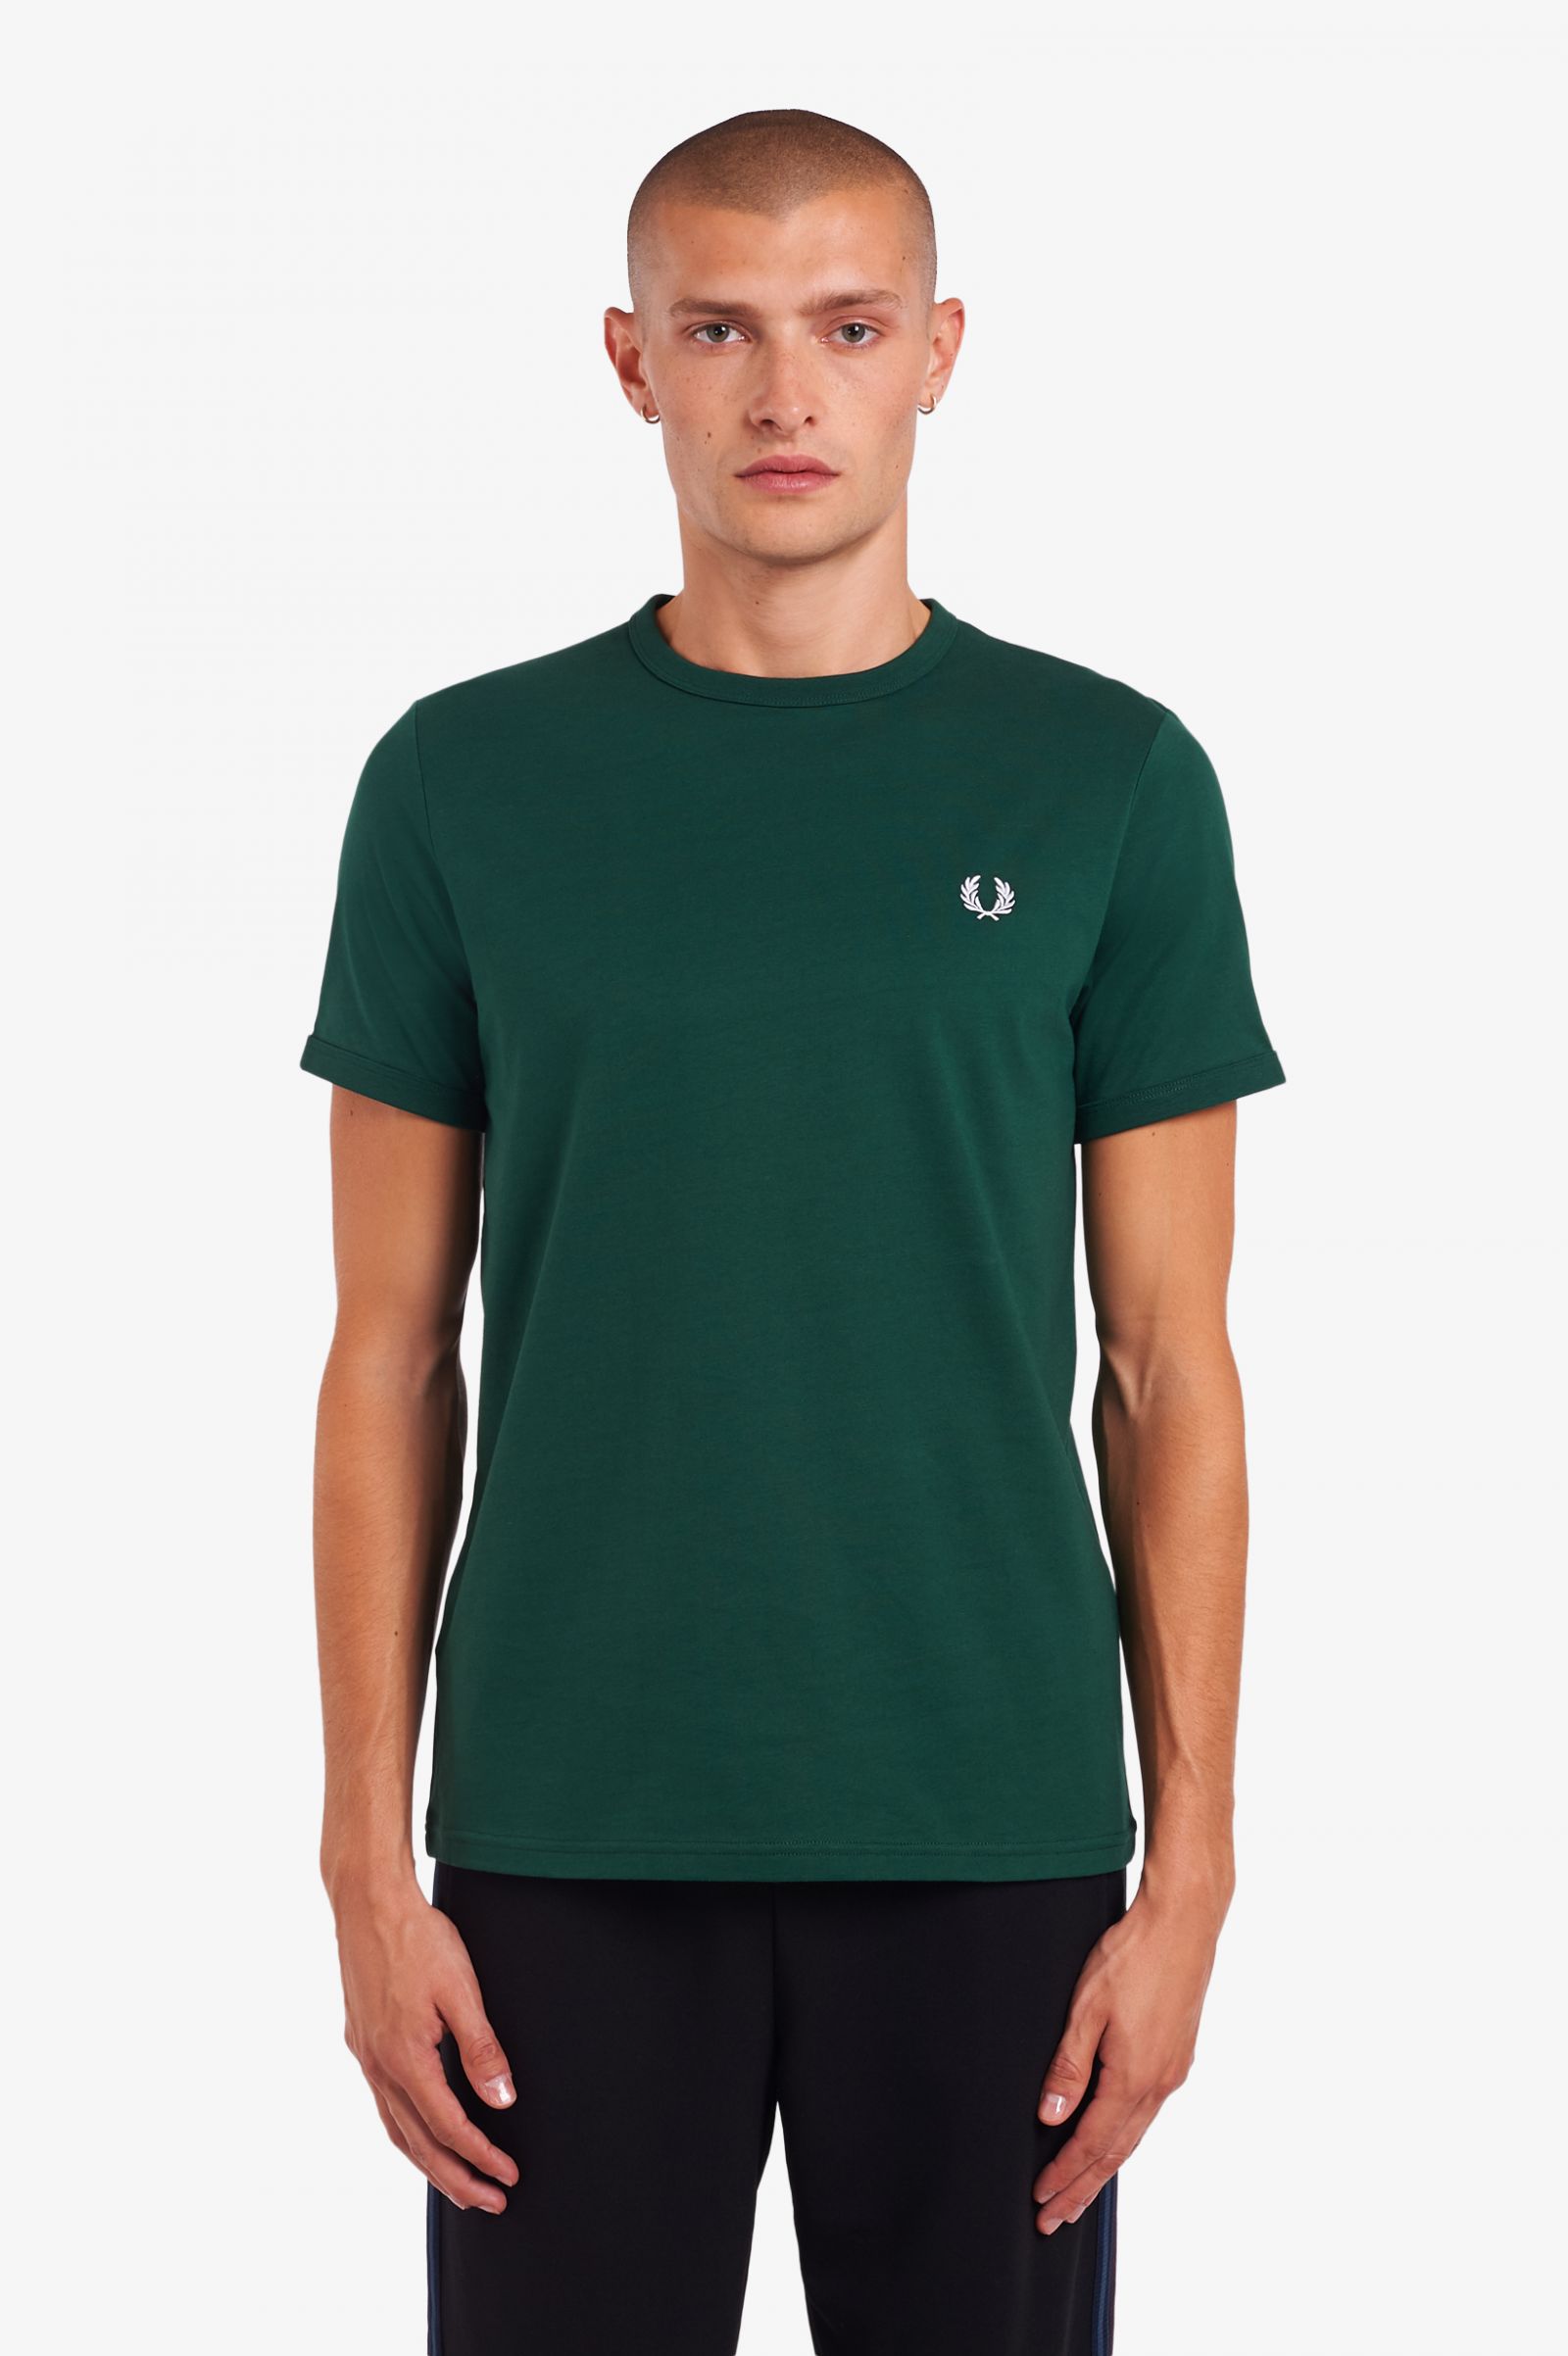 CAMISETA FRED PERRY RINGER GREEN